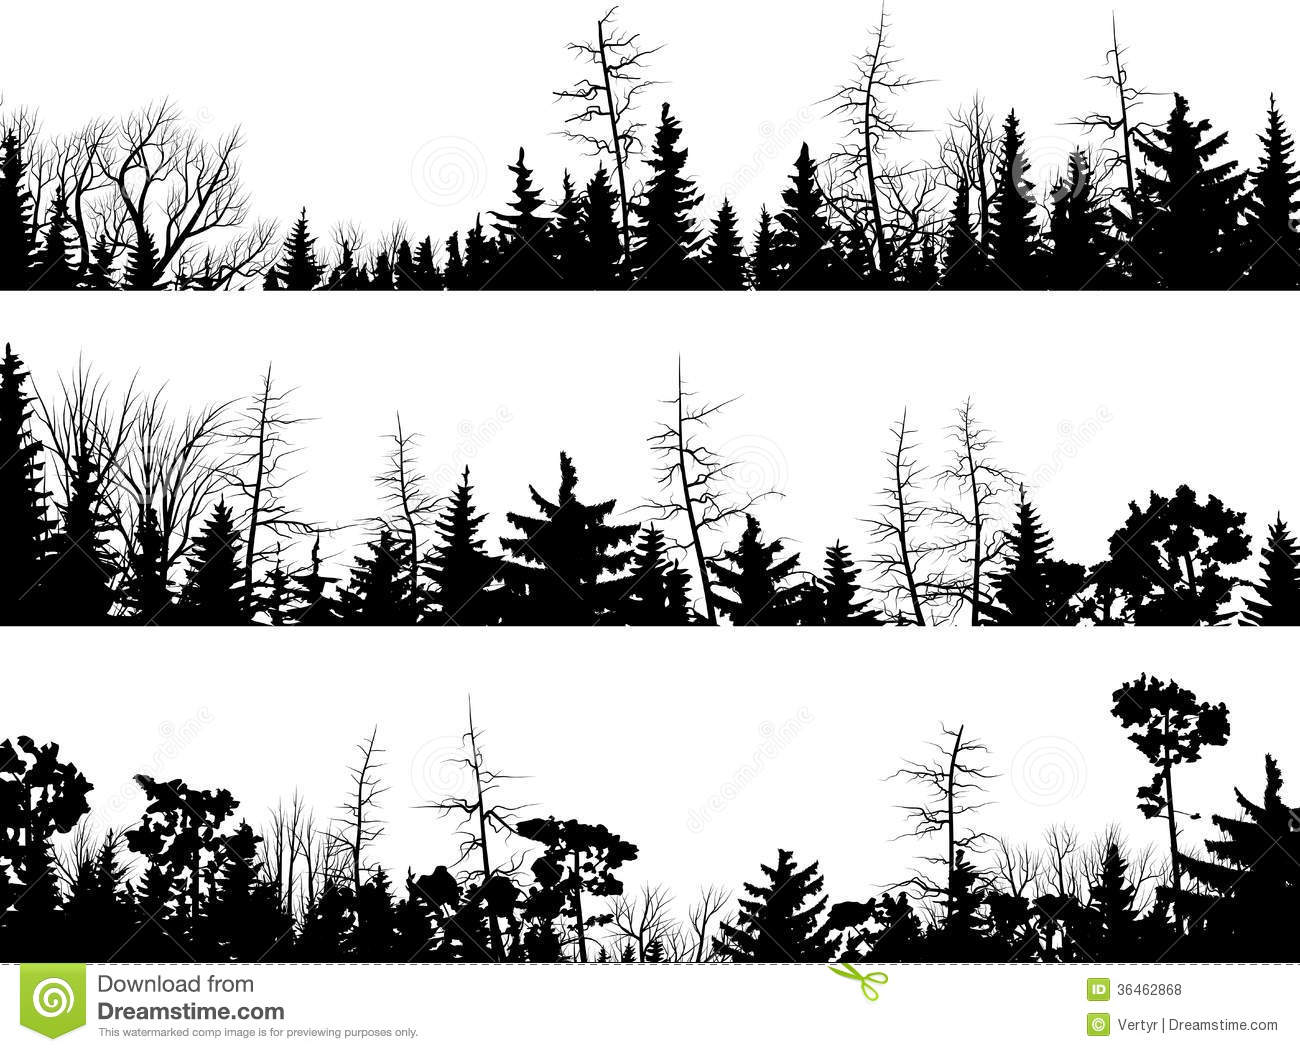 17 Vector Forest Silhouette Images - Forest Tree Silhouette, Forest Silhouettes Vector Free and